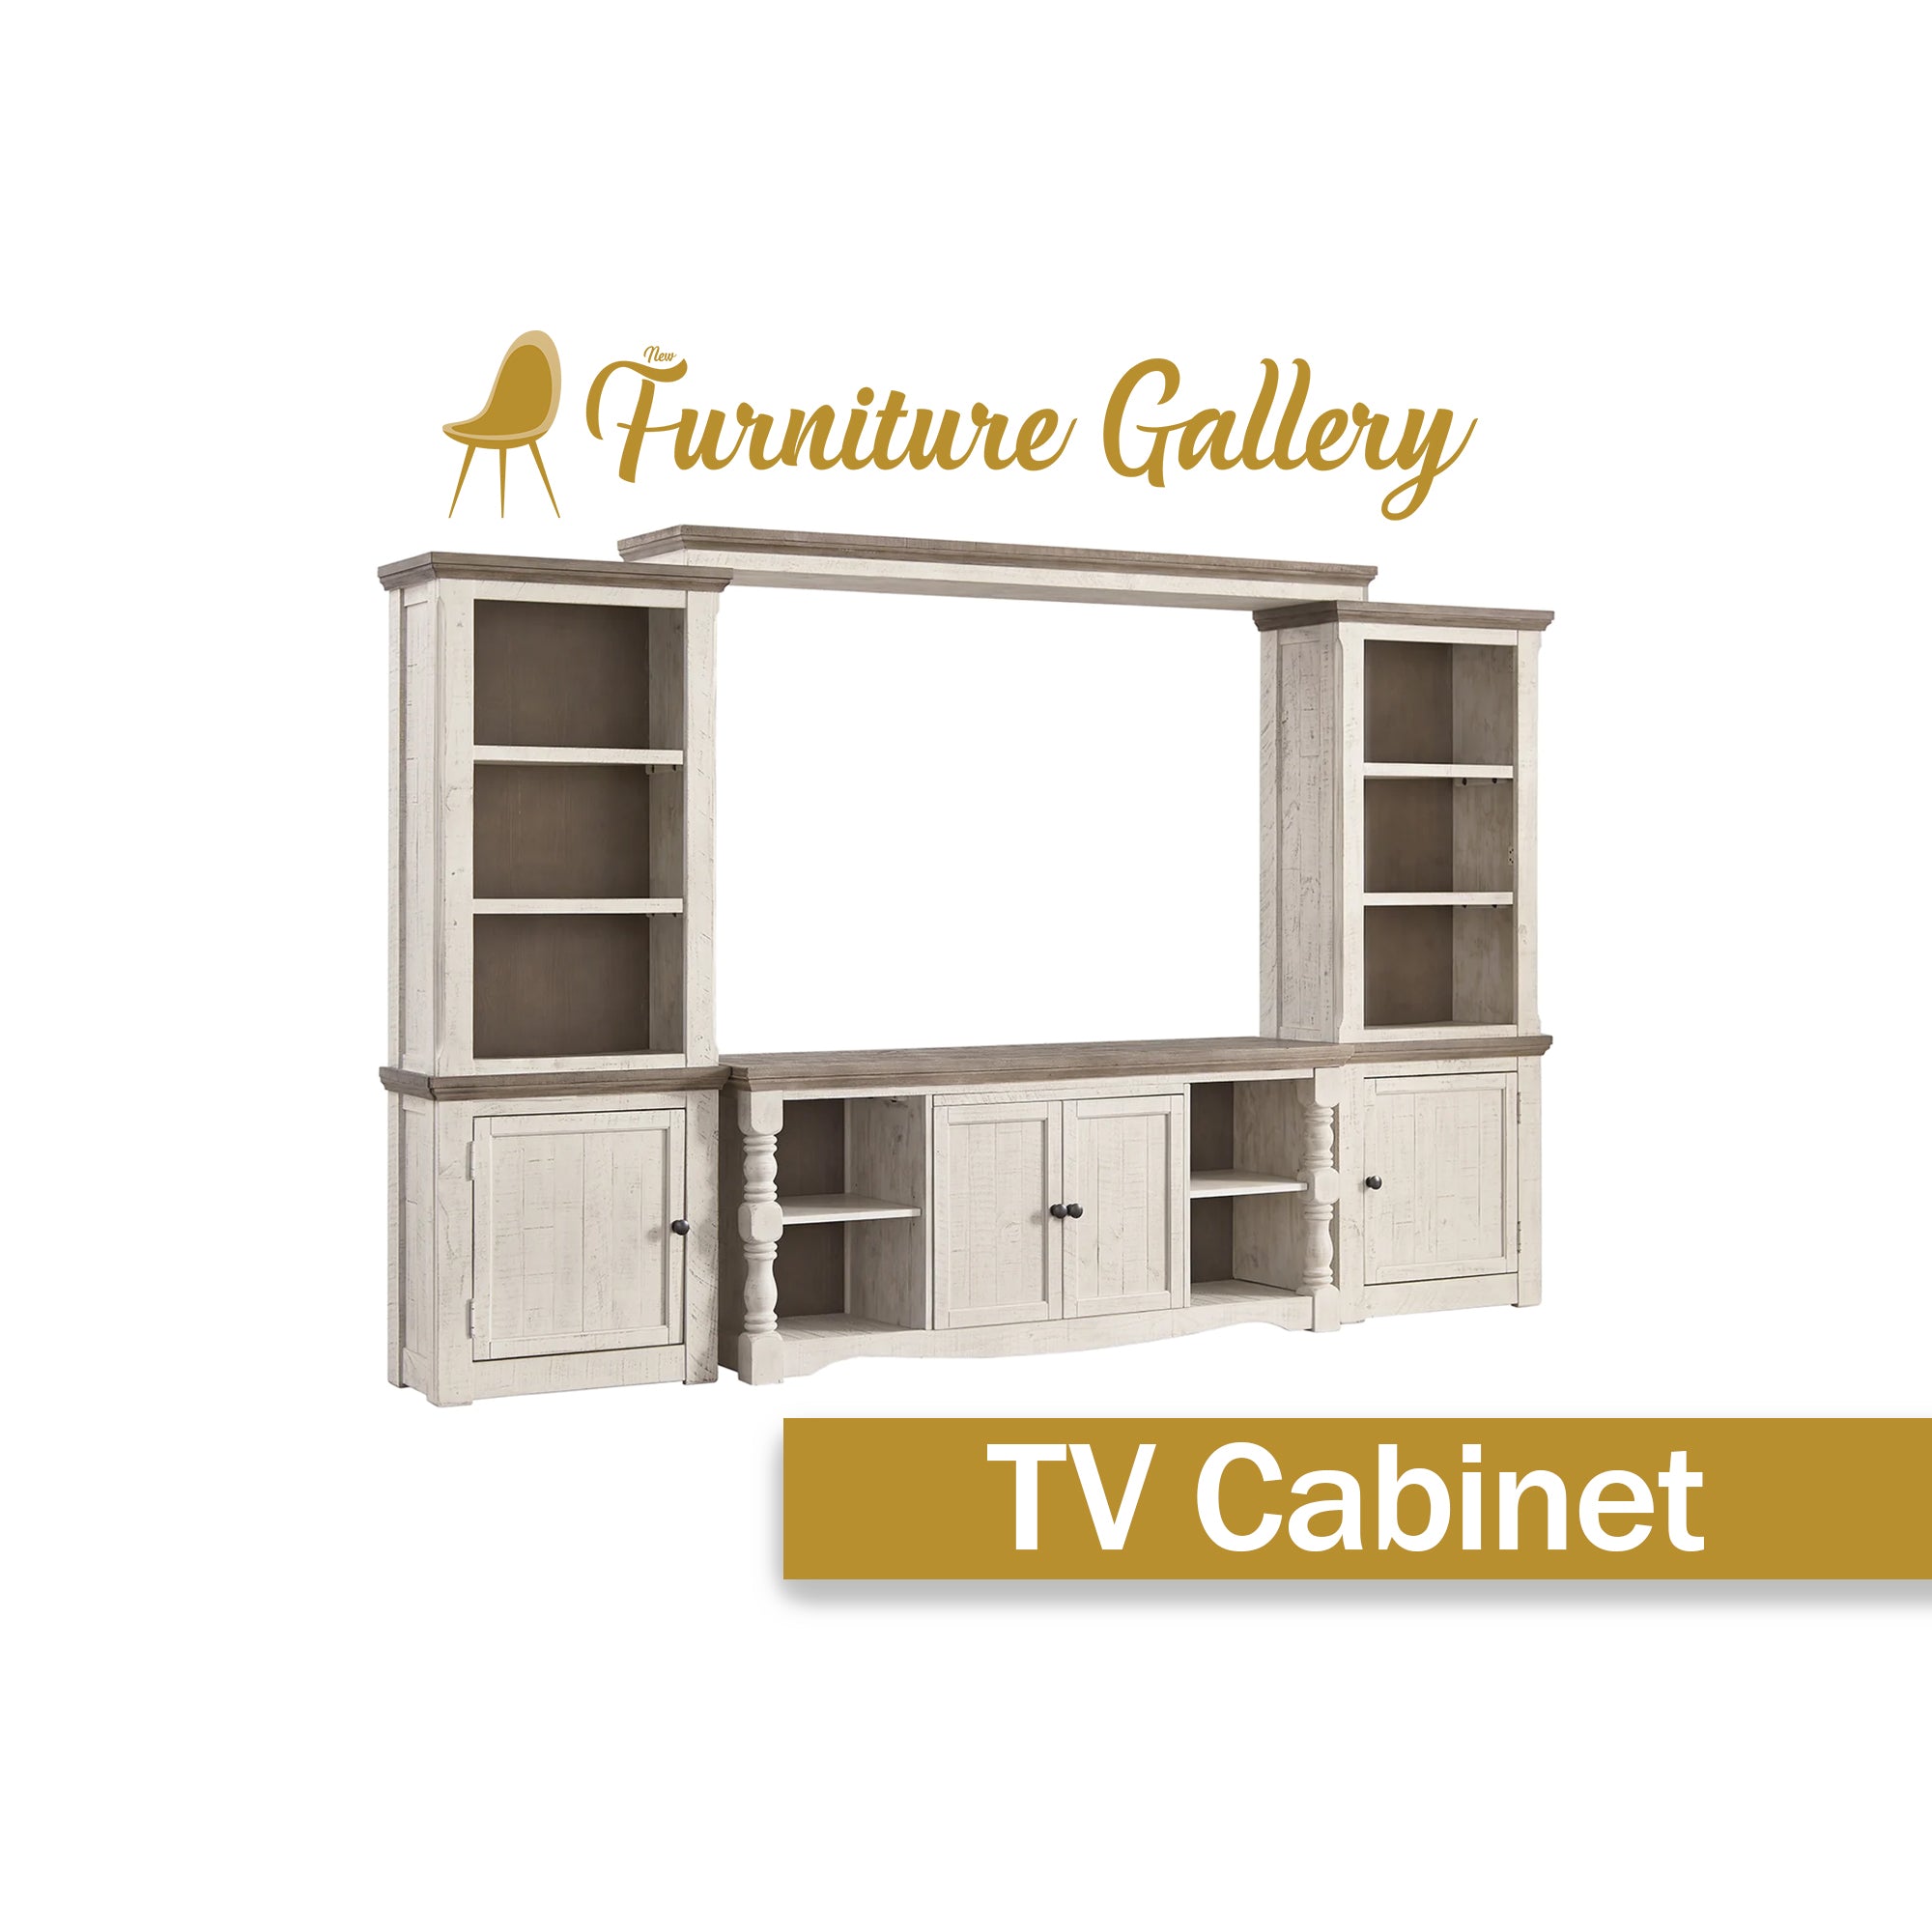 TV cabinets by New Furniture Gallery. New Furniture Gallery 